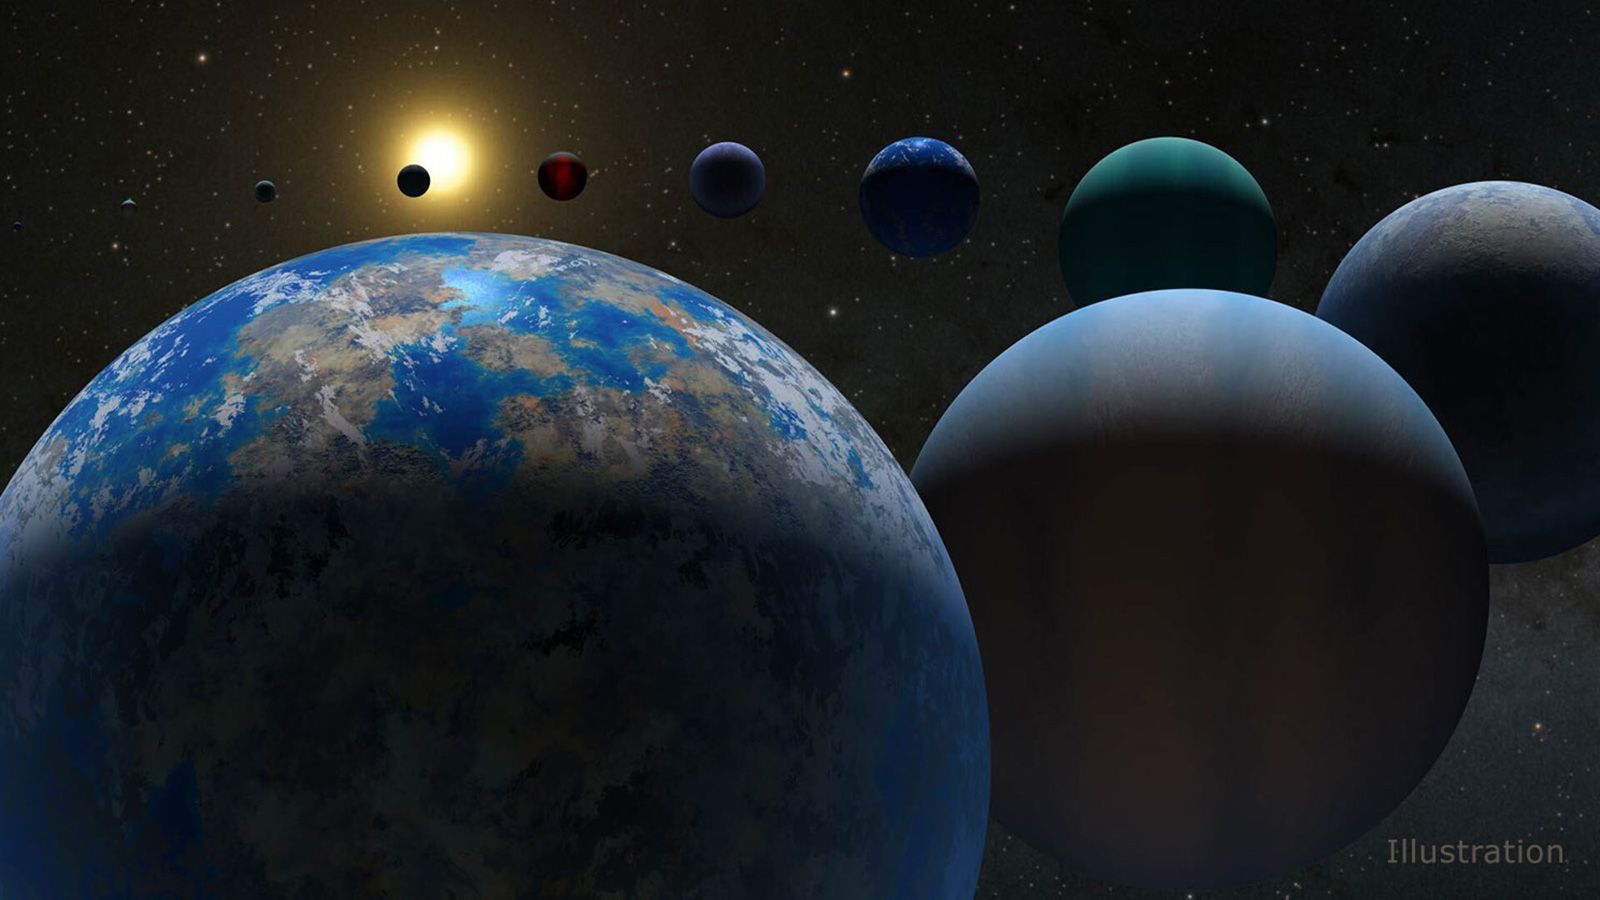 Understanding the Planets in Our Solar System